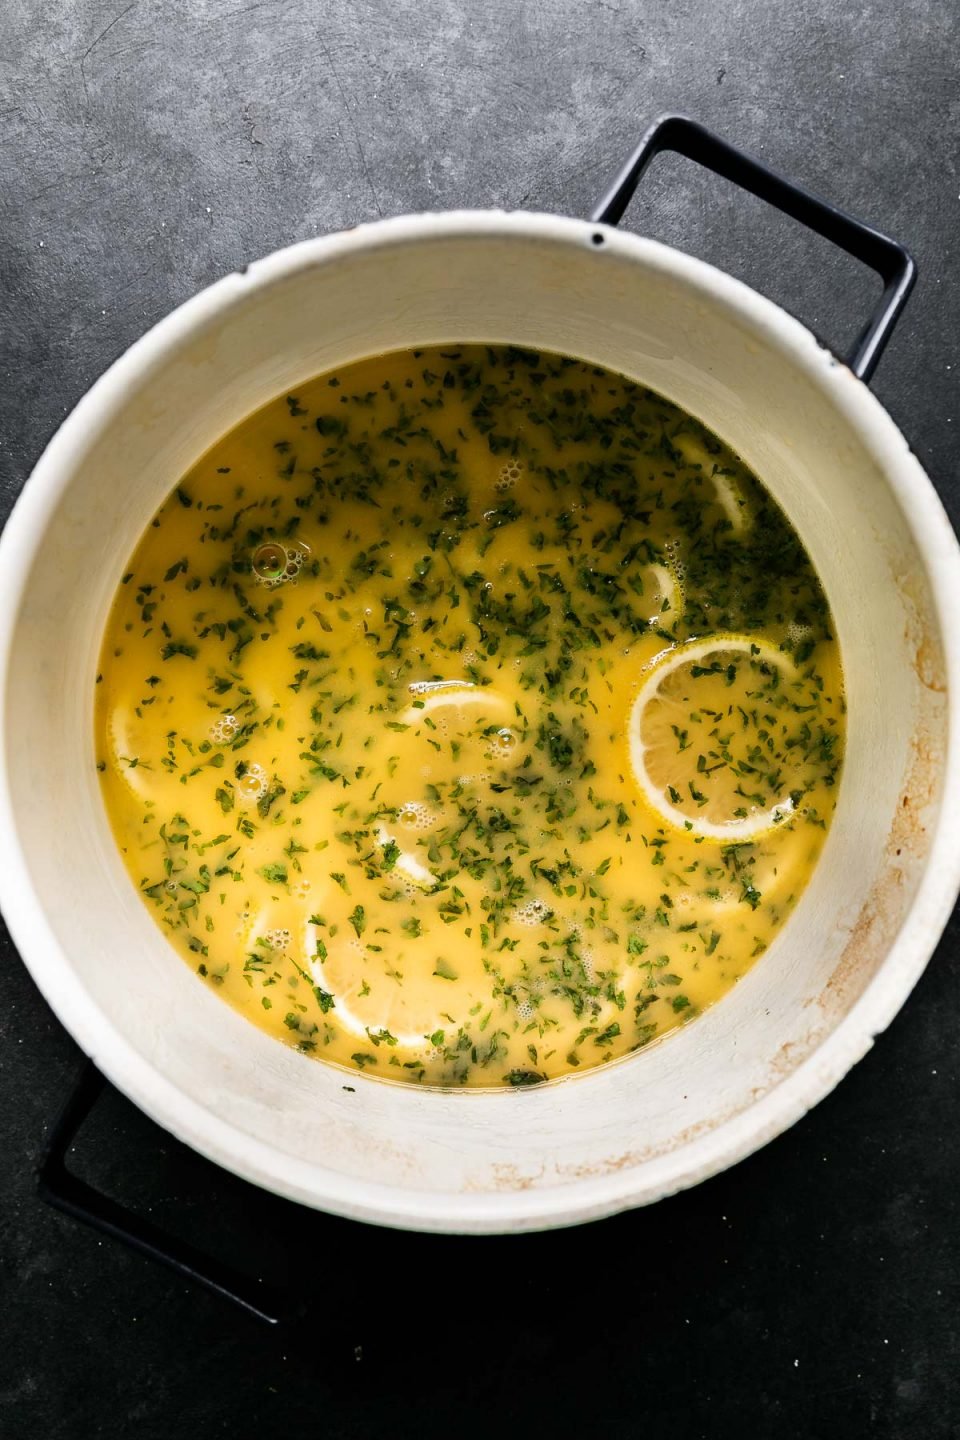 How to Make Prosecco Butter Poached Shrimp, Step 3: Preparing the Prosecco Butter Poaching Liquid. Reduced Prosecco combined with butter, lemon juice, sliced lemon, crushed garlic cloves and dried parsley fills a medium saucepan. The saucepan sits atop a black textured surface.